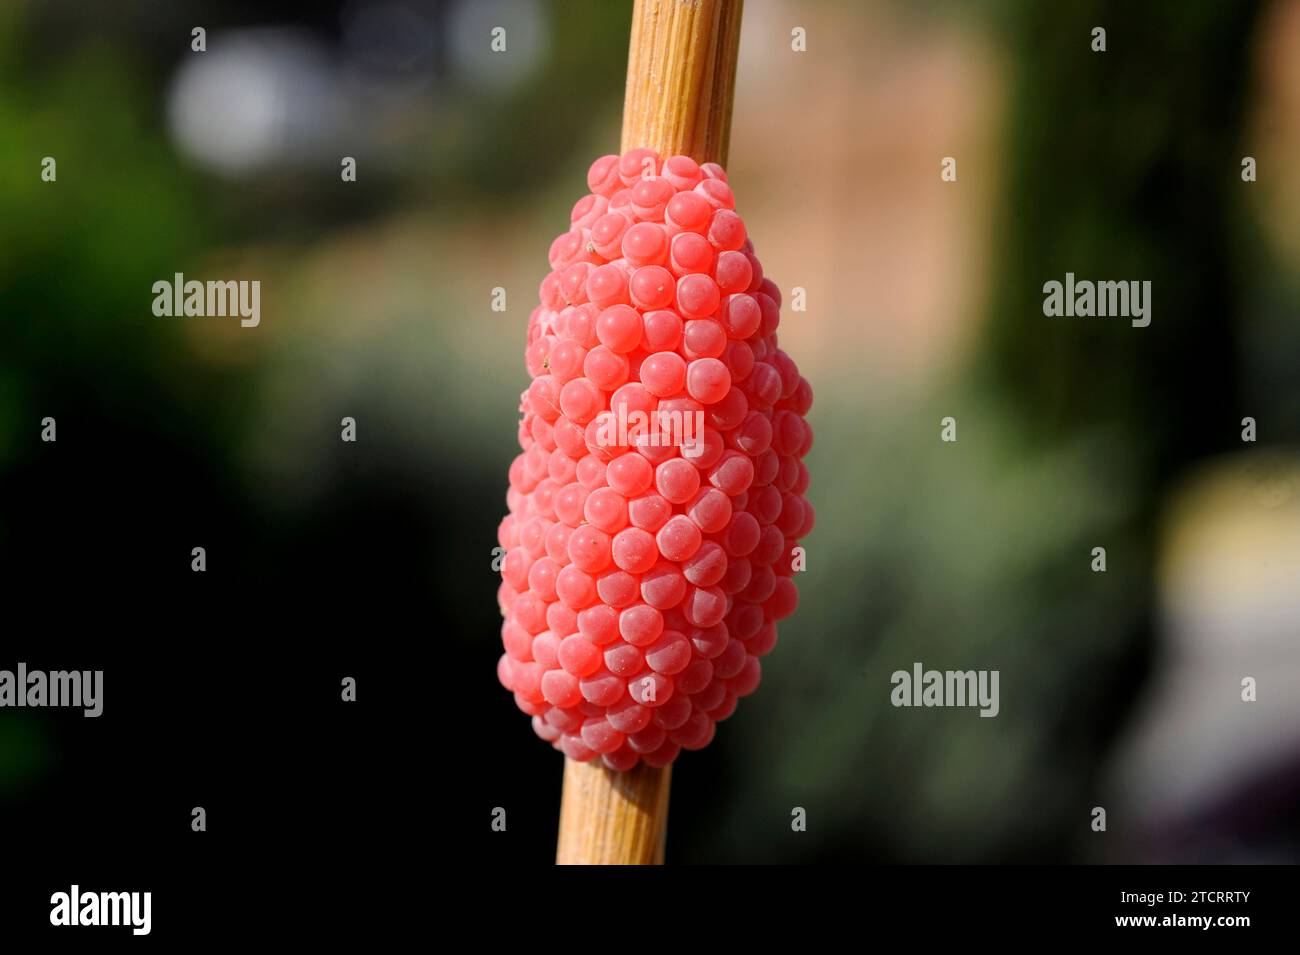 Apple snail (Pomacea maculata or Pomacea insularum) is an invasive freshwater snail native to South America. Eggs on a rice stem. This photo was taken Stock Photo